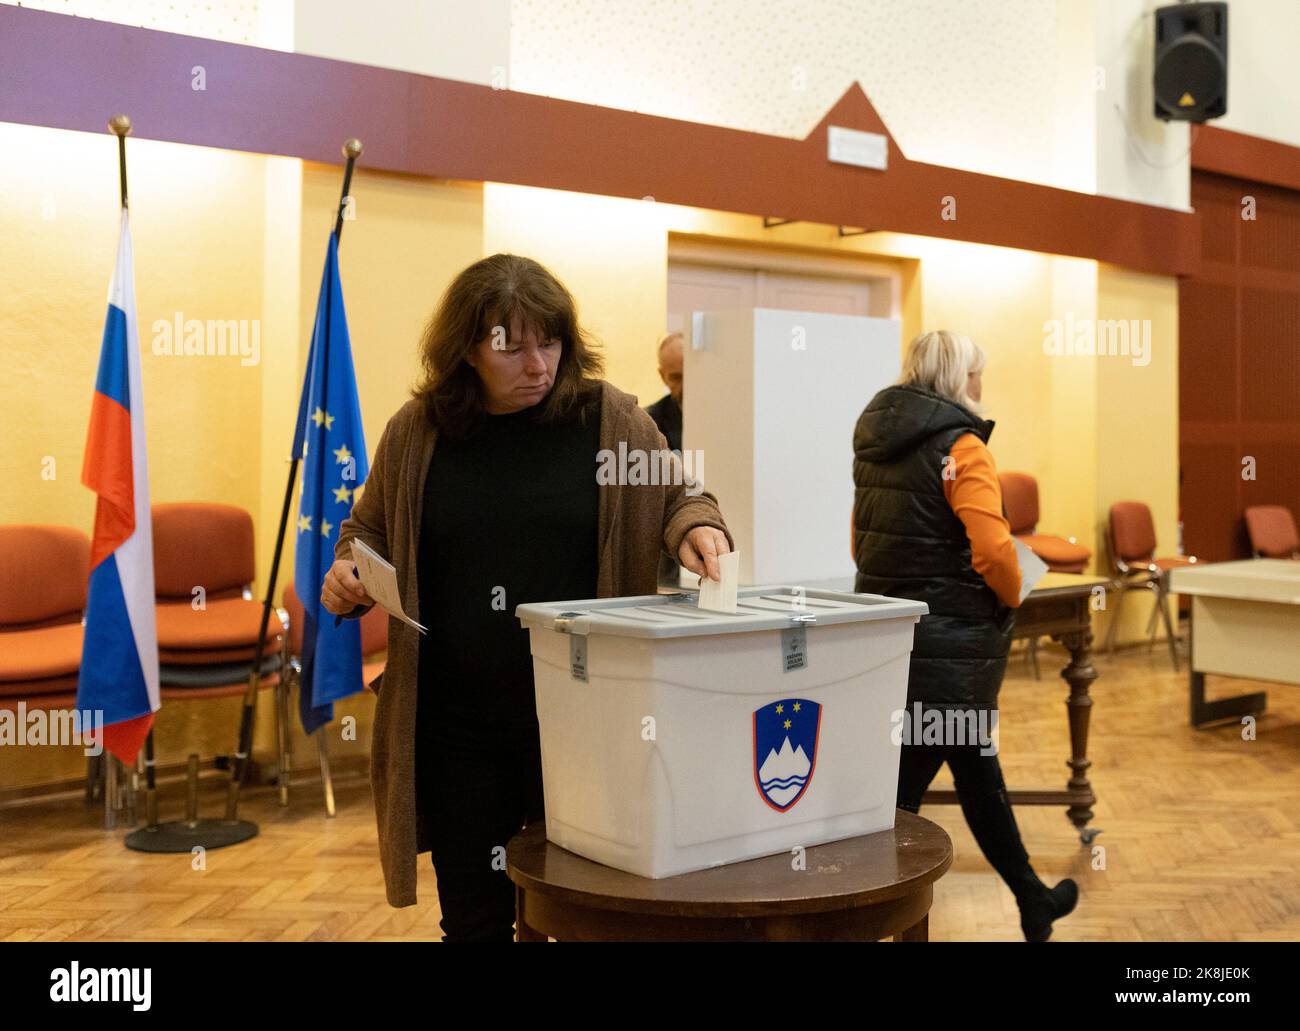 Ljubljana, Slovenia. 23rd Oct, 2022. A voter casts ballot during the presidential election at a polling station in Radomlje, Slovenia, Oct. 23, 2022. Slovenia is due to hold the second round of presidential election on Nov. 13 after no candidate got majority in the first round held on Sunday. Credit: Zeljko Stevanic/Xinhua/Alamy Live News Stock Photo